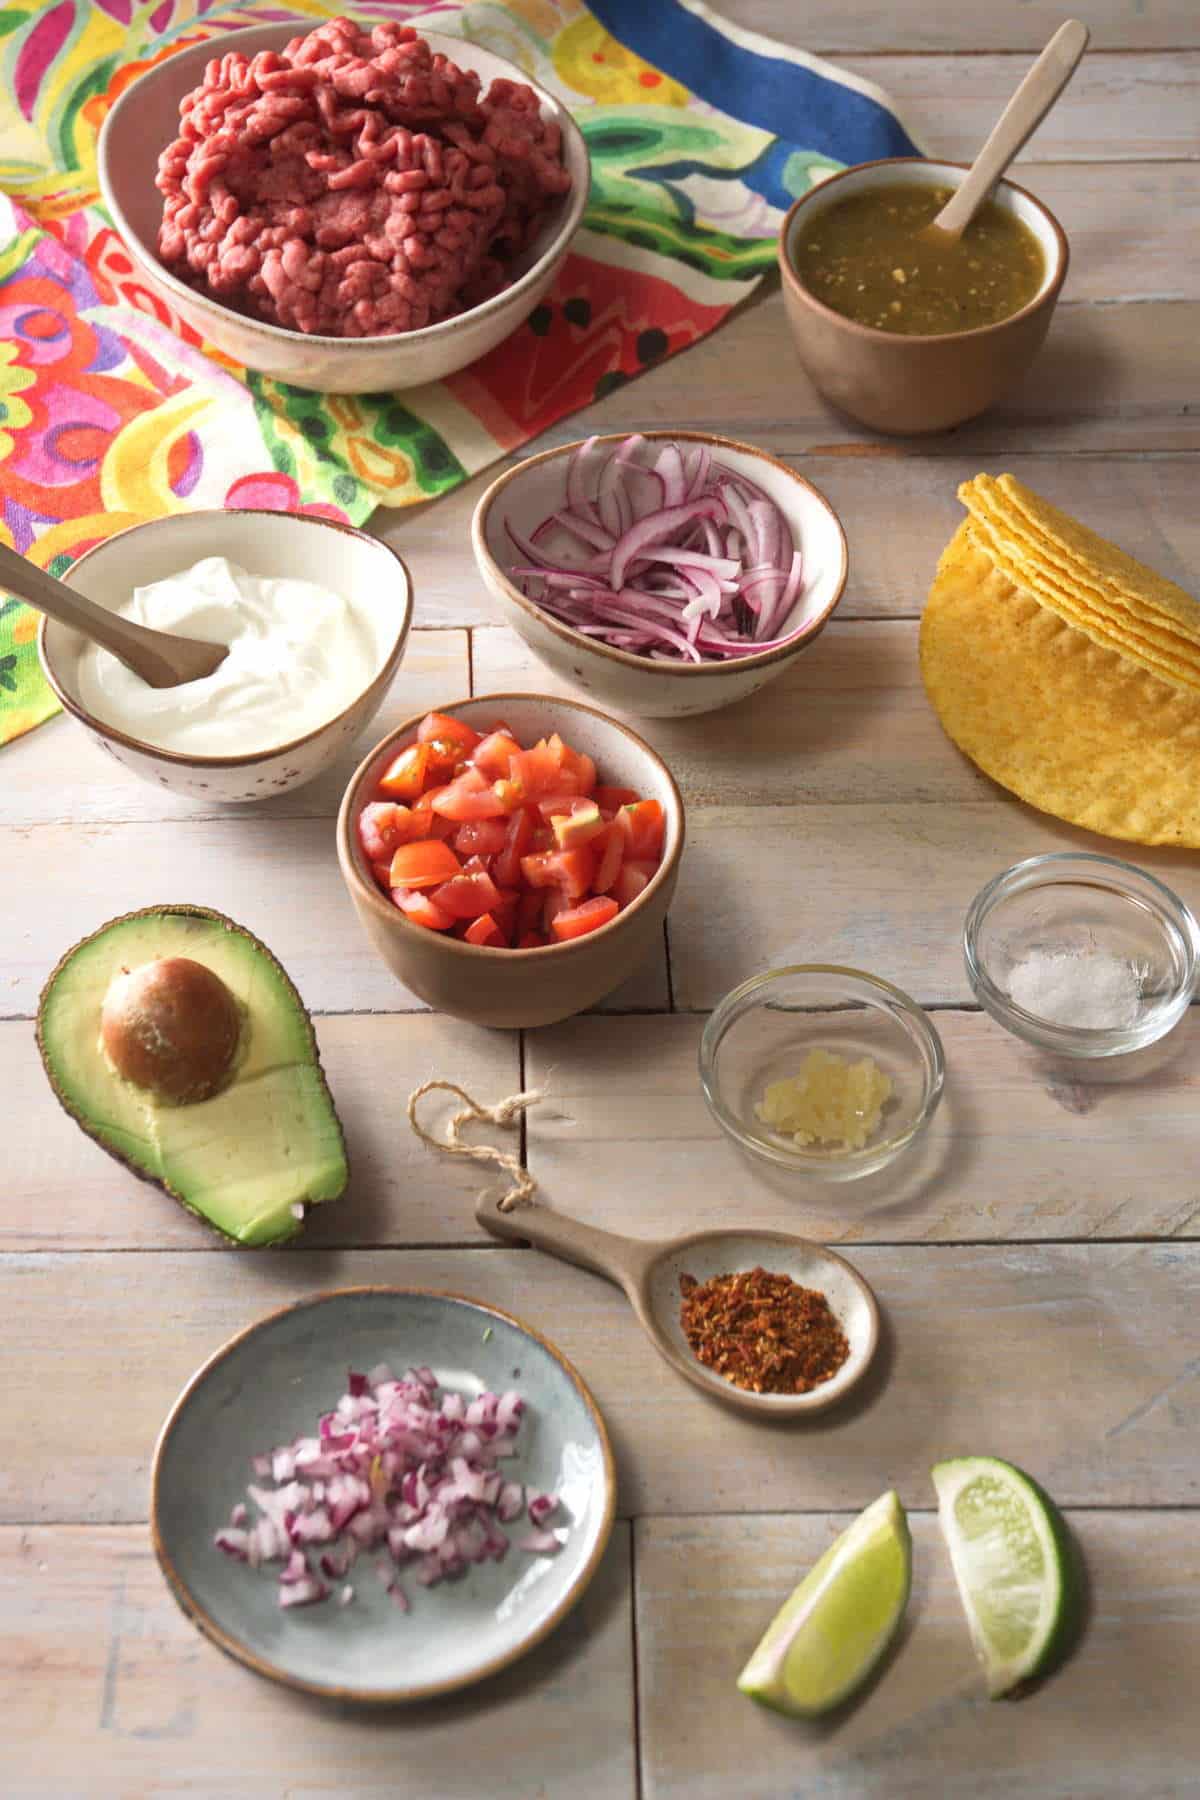 Bison taco ingredients prepped in small bowls on light wooden background.